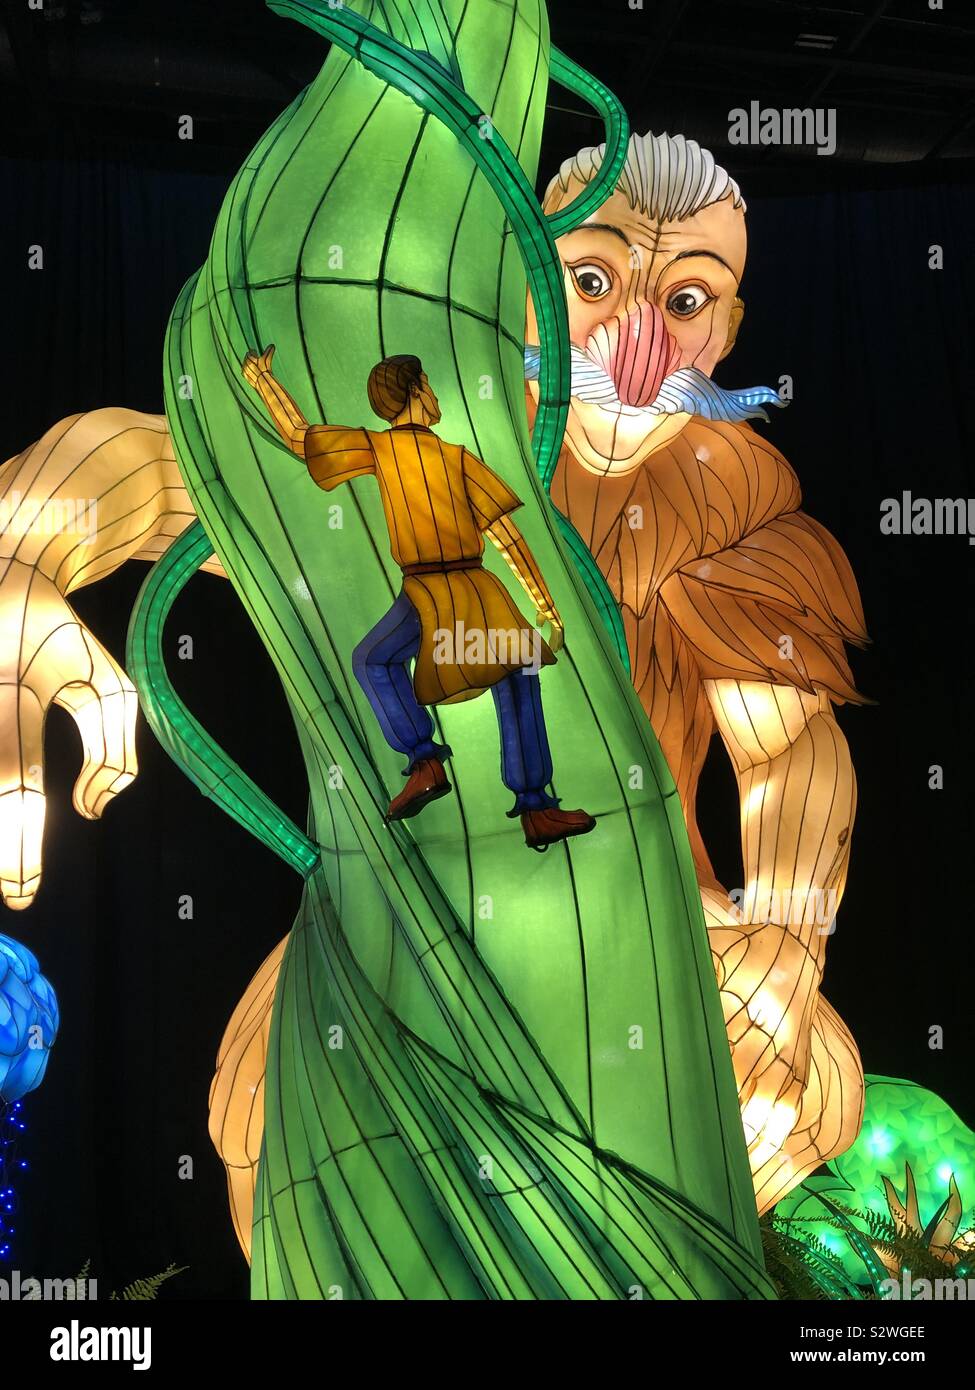 A sculpture of Jack and the Beanstalk at a lantern festival. Stock Photo